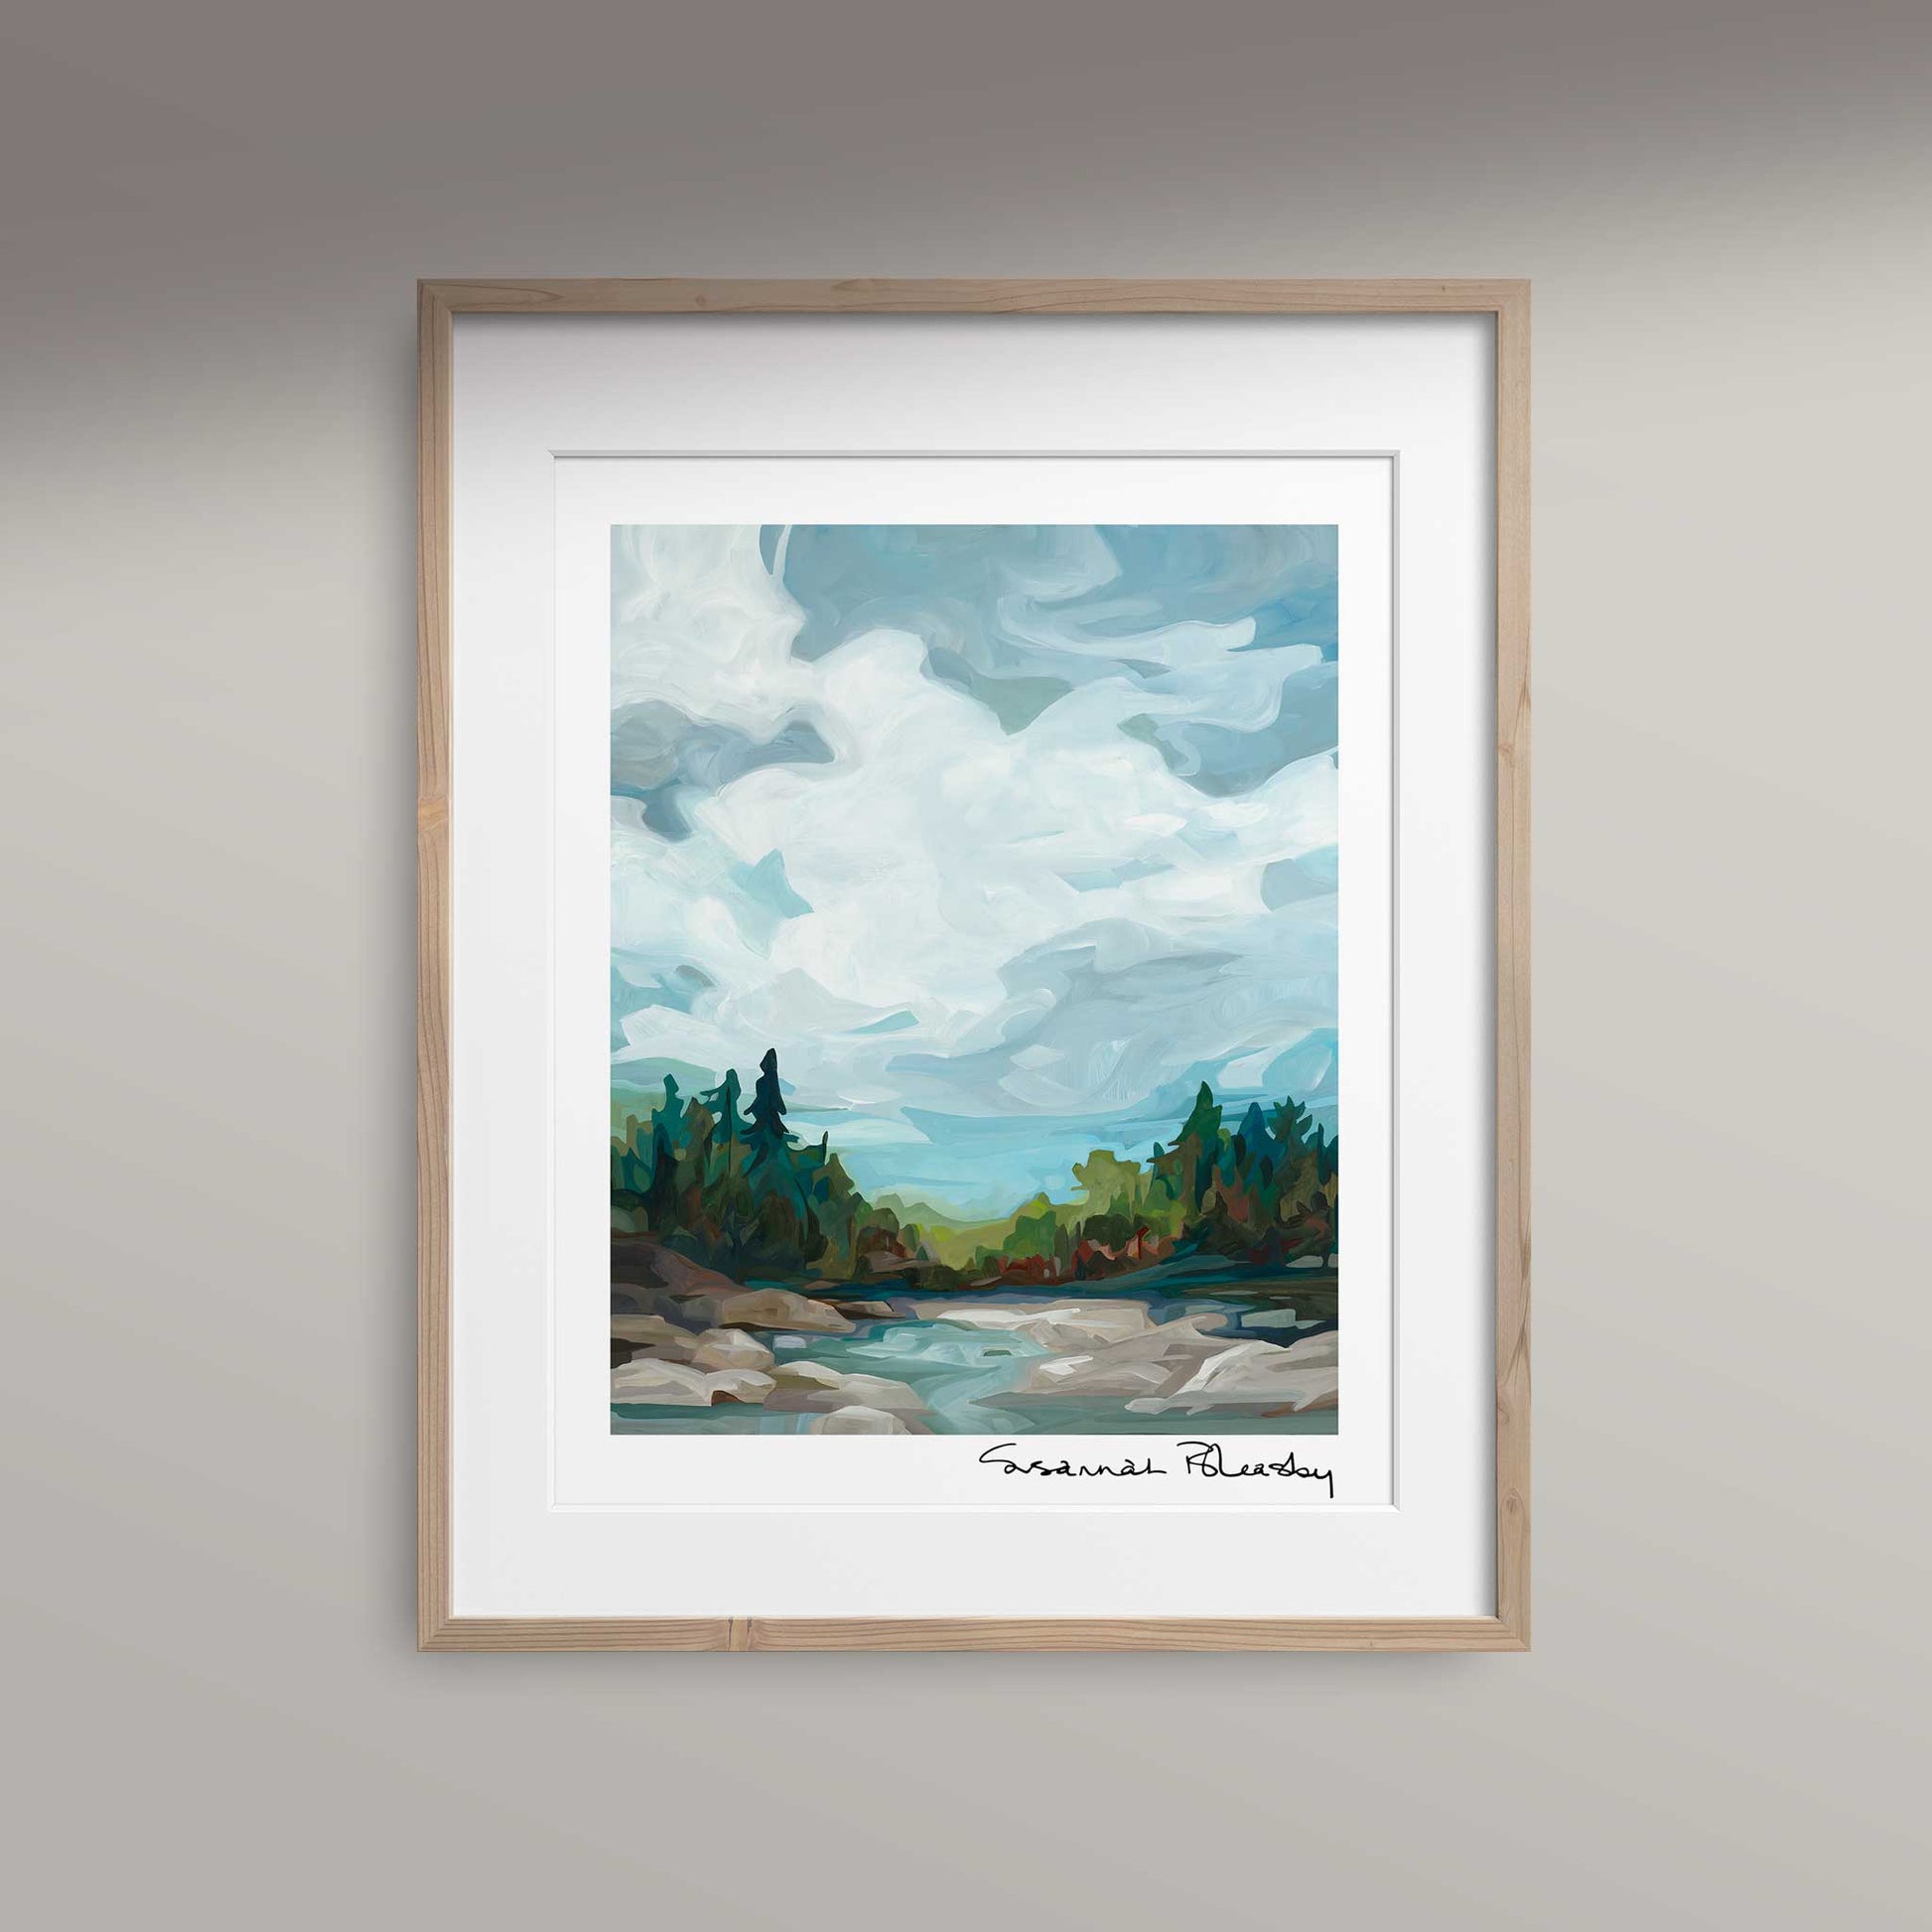 16x20 vertical art print of abstract landscape with blue grey sky